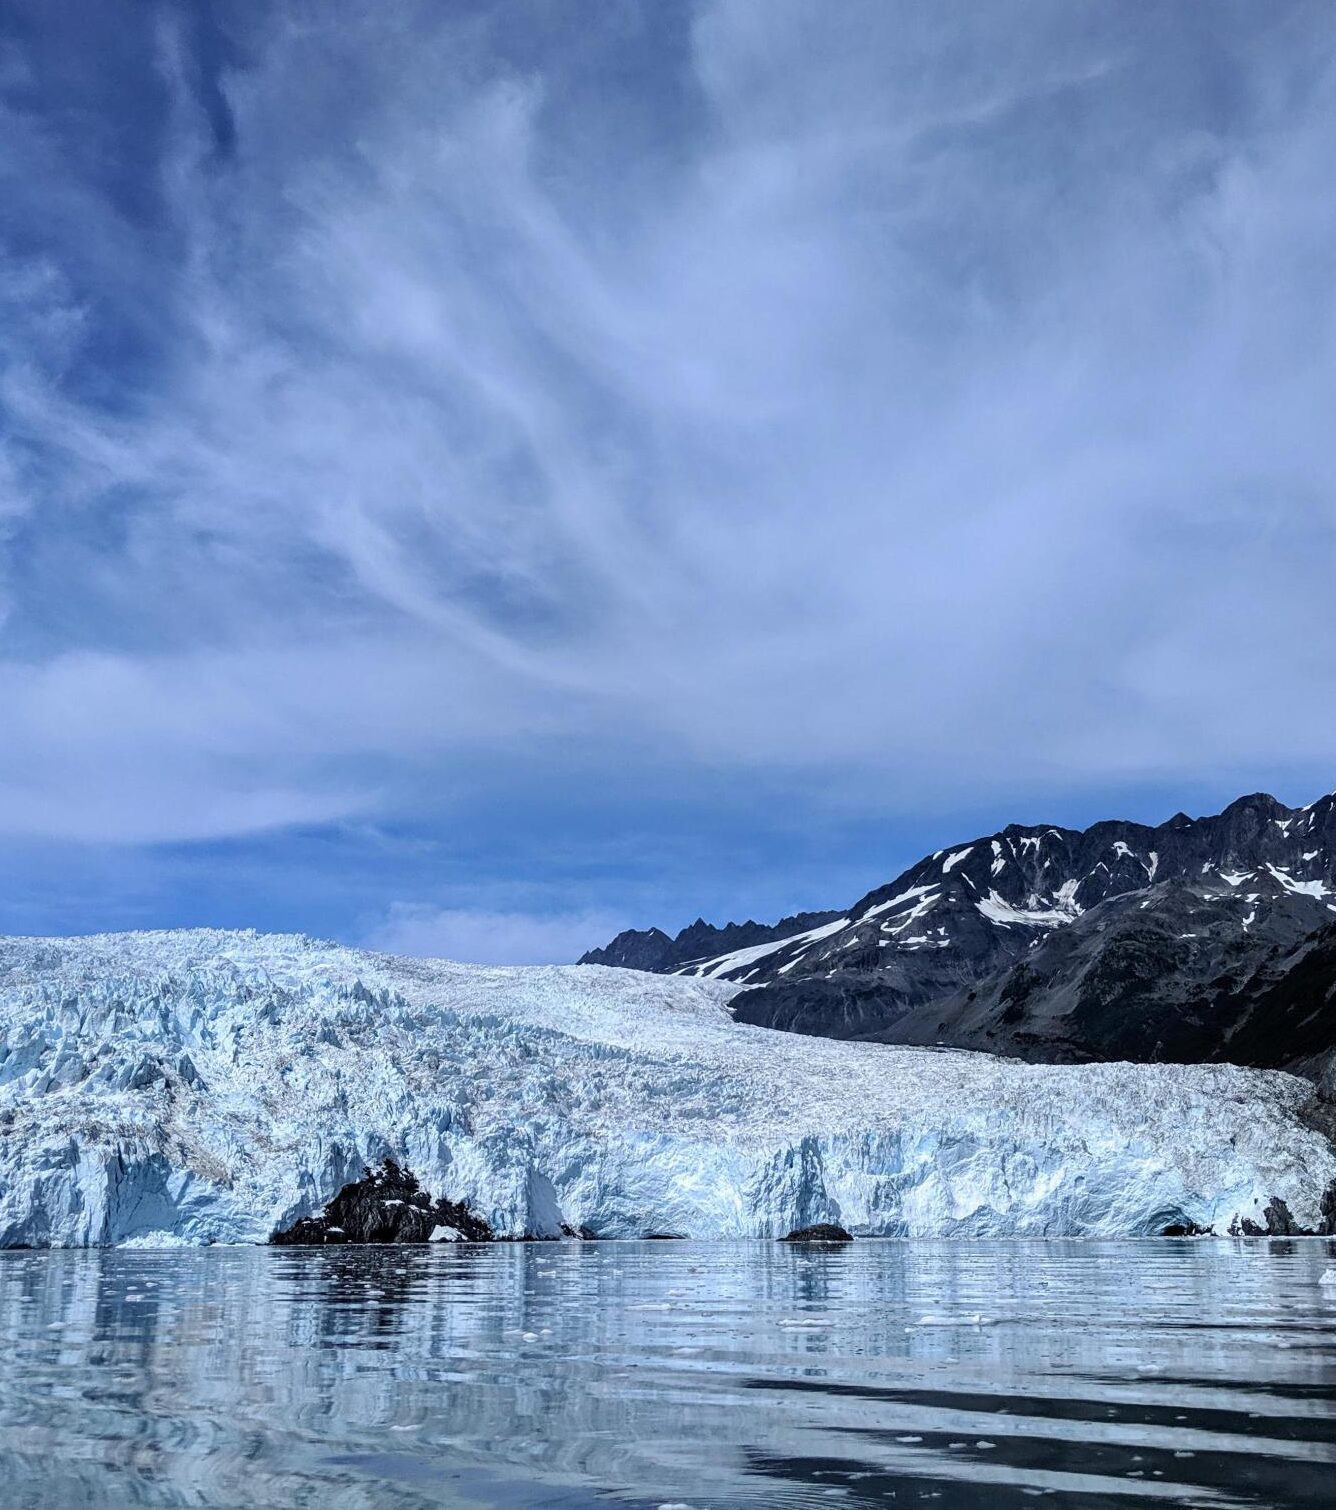 Best glaciers in Alaska | Alaska glaciers to check out during your Alaska travel vacation